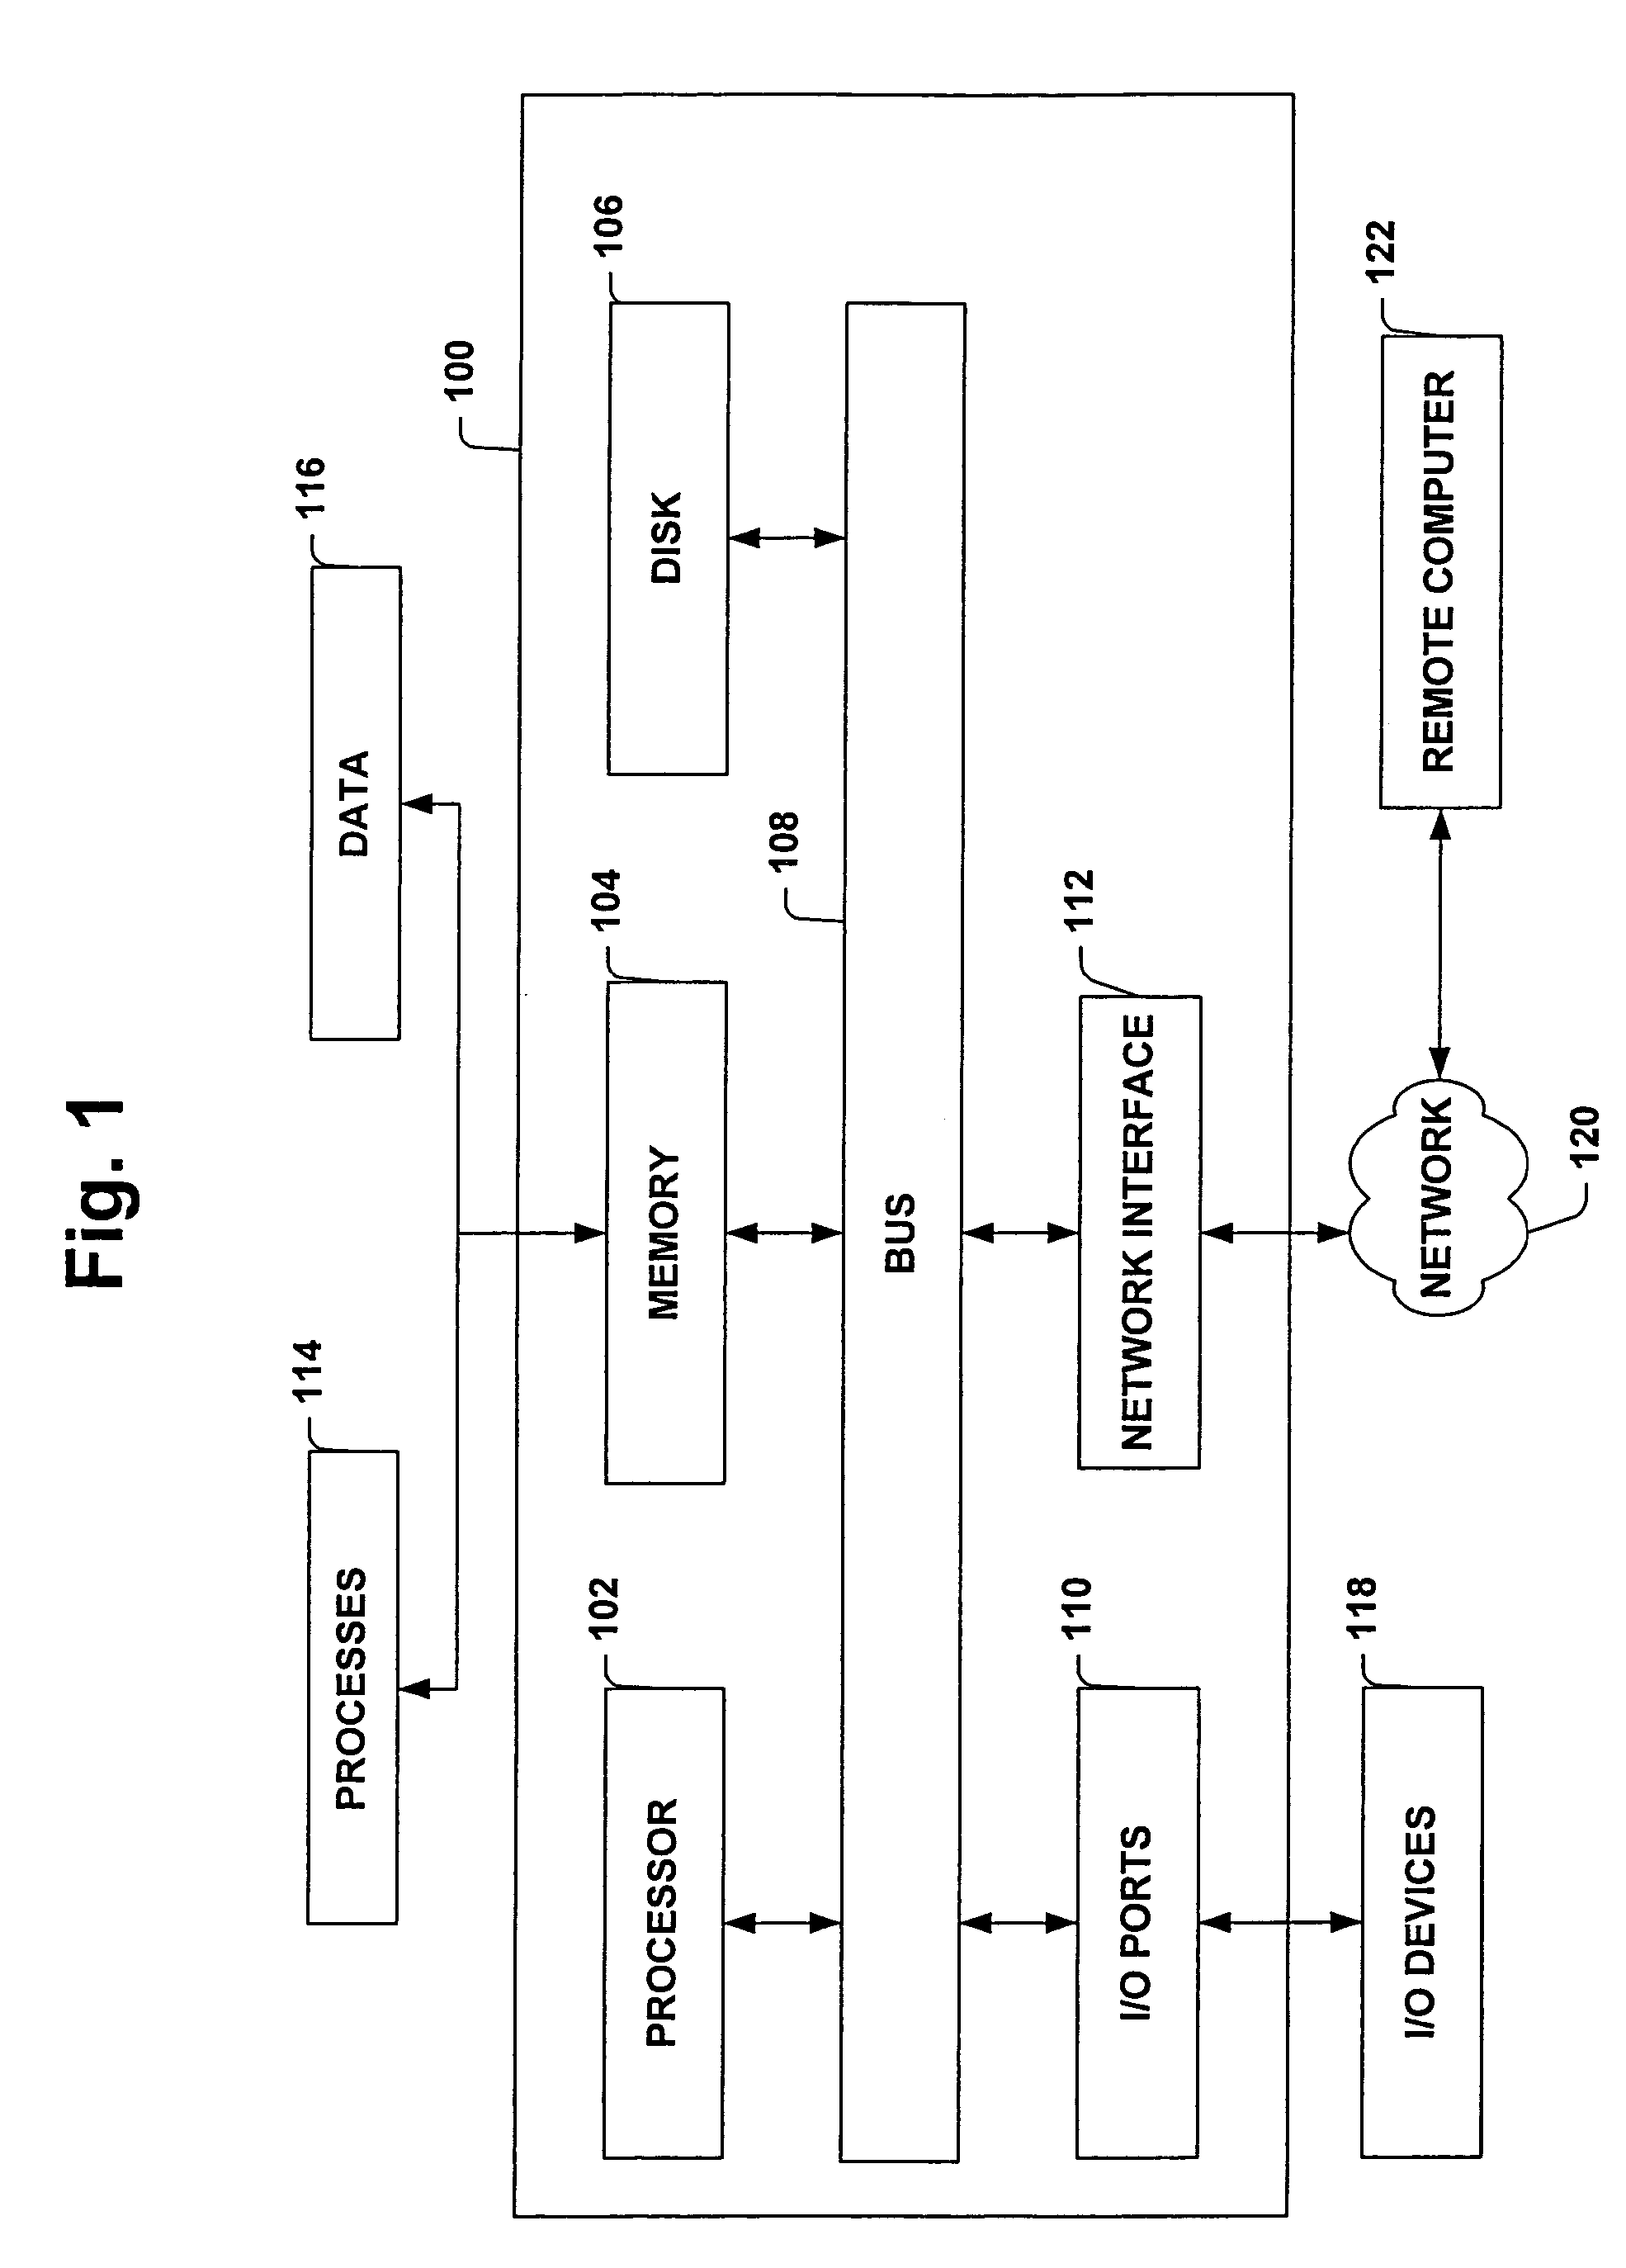 System and method for transforming business process policy data